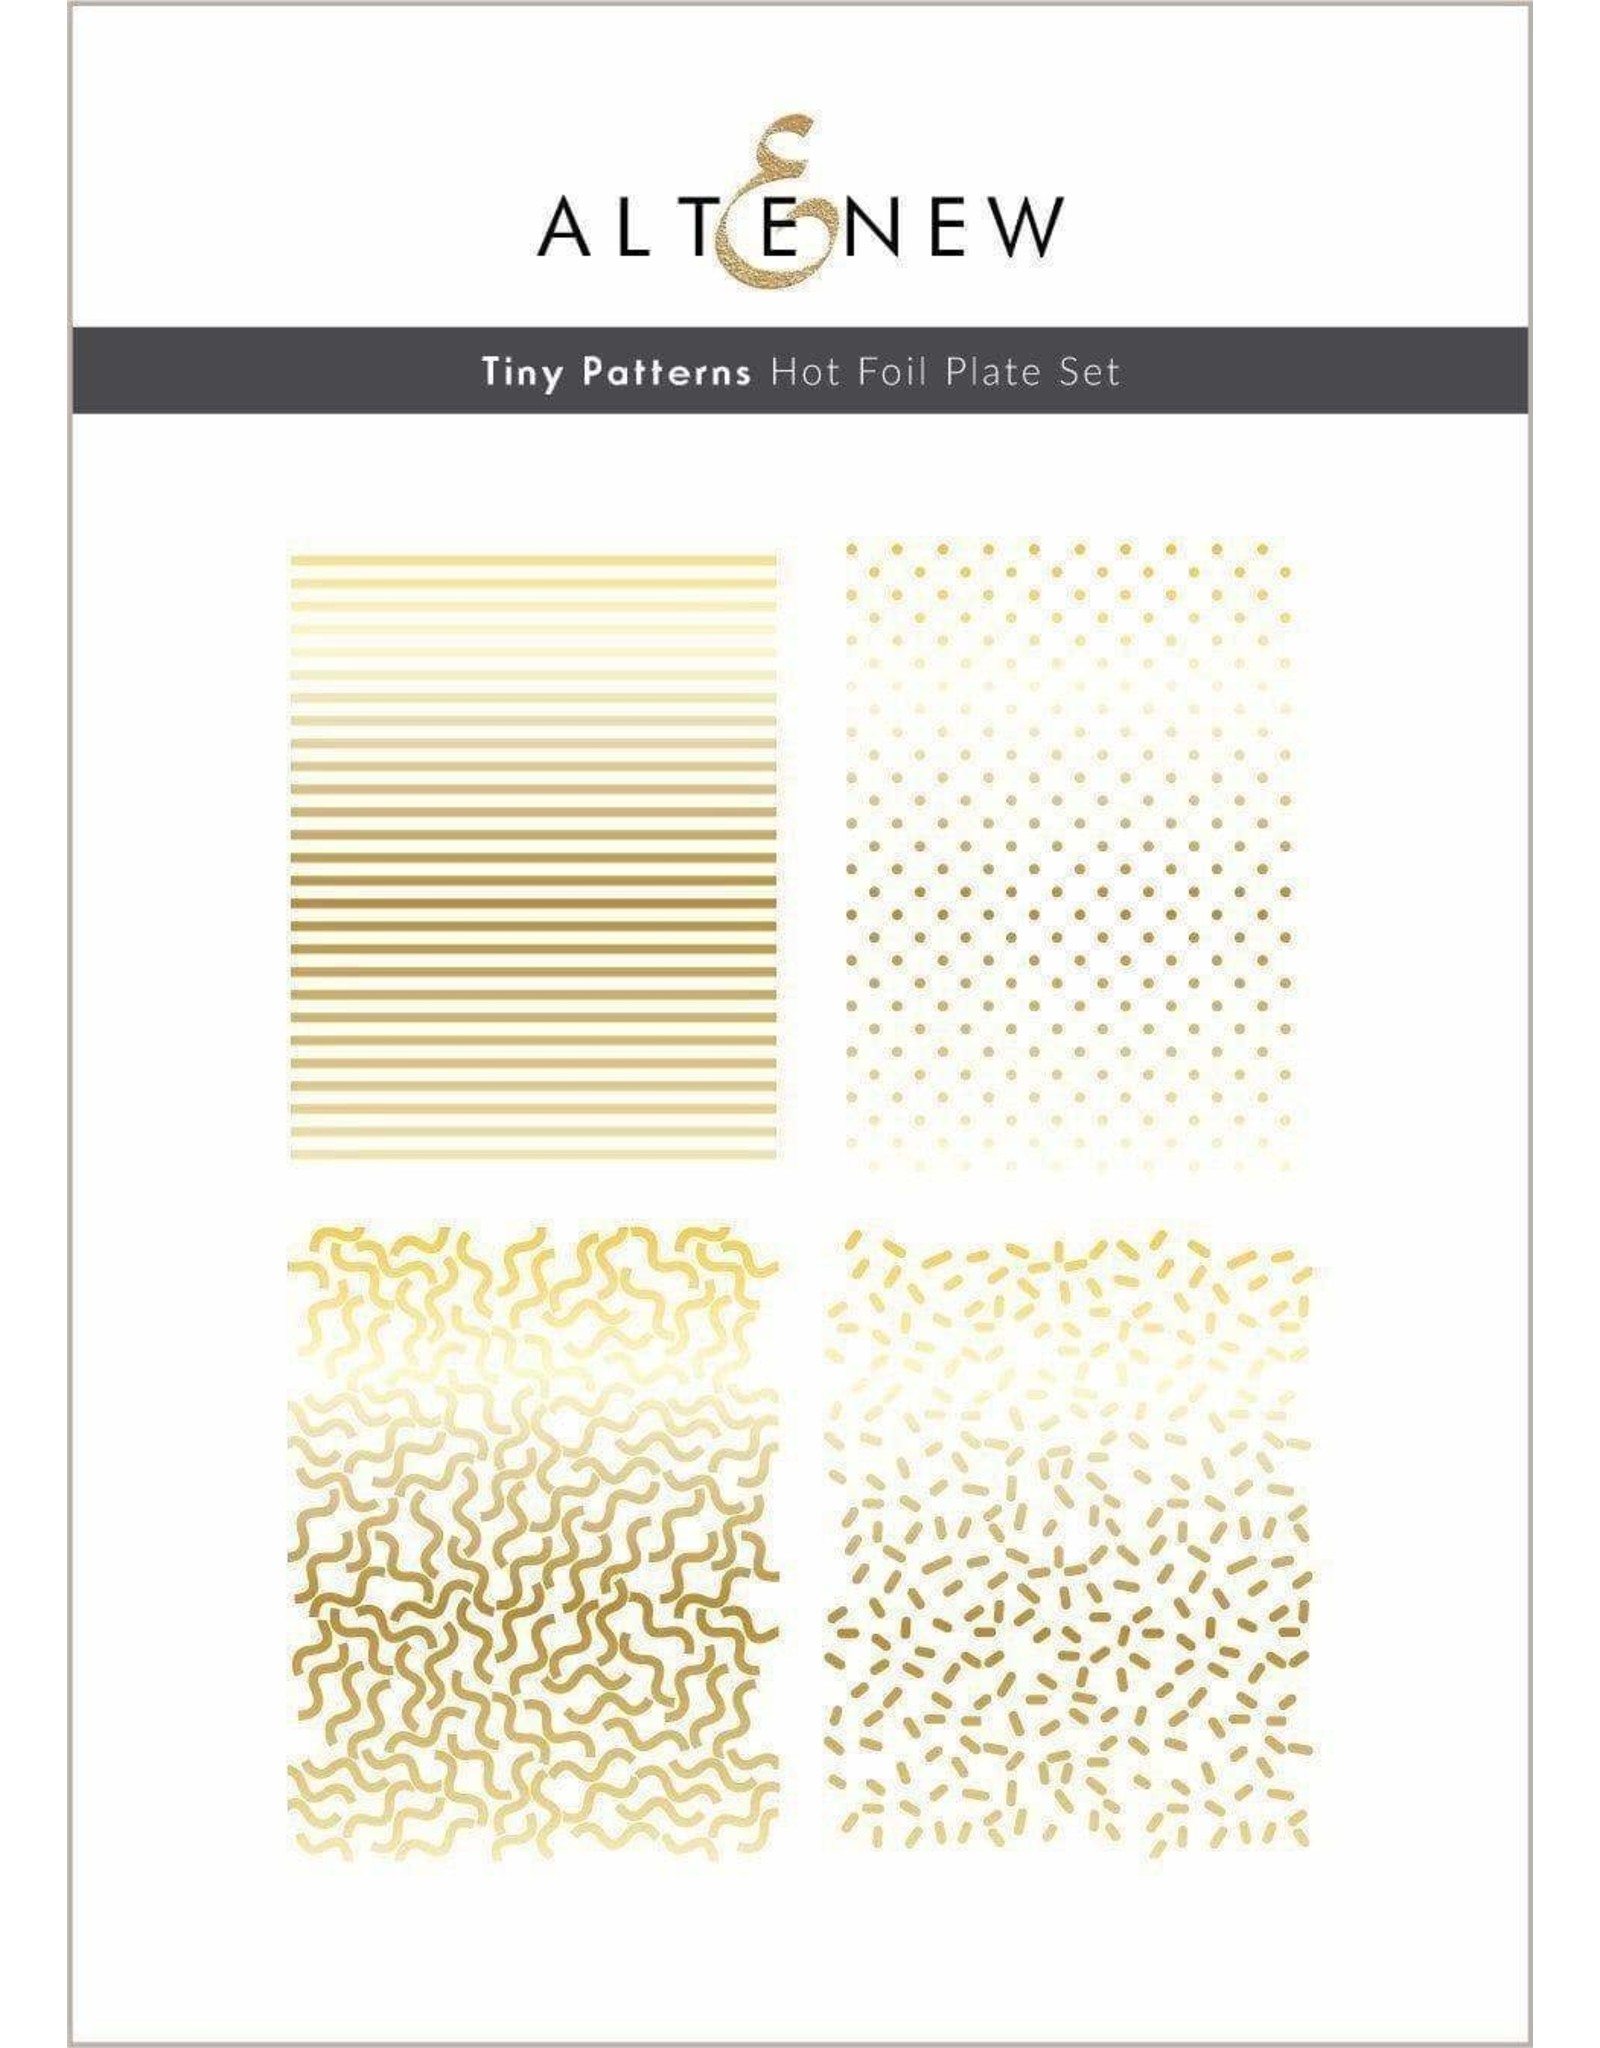 ALTENEW Tiny Patterns Hot Foil Plate Set (4 in)1